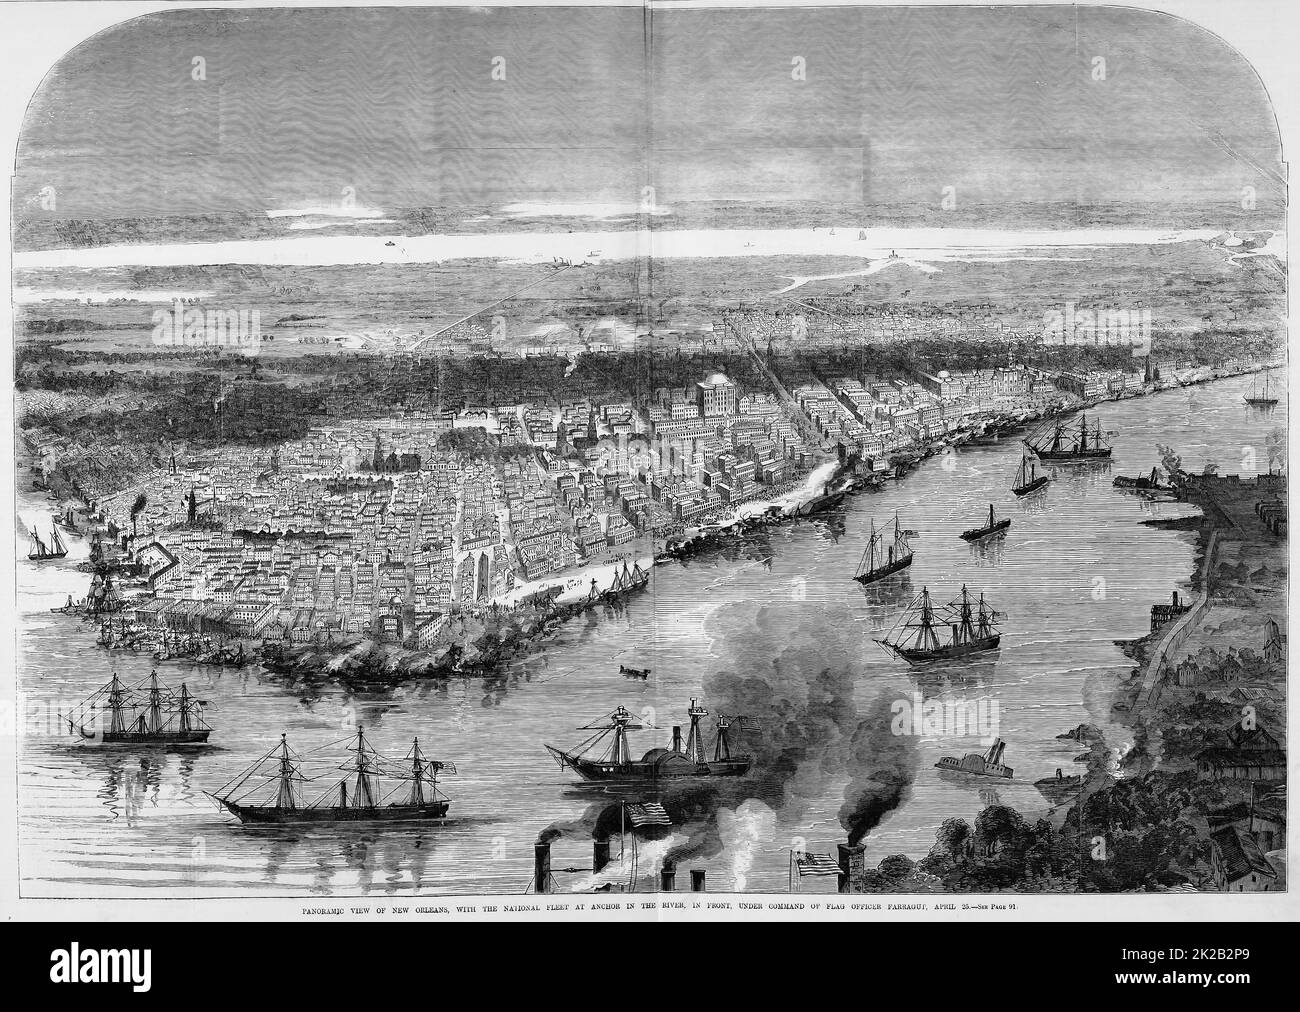 Panoramic view of New Orleans, Louisiana, with the National fleet at anchor in the river, in front, under command of flag officer David Glasgow Farragut, April 25th, 1862. 19th century American Civil War illustration from Frank Leslie's Illustrated Newspaper Stock Photo